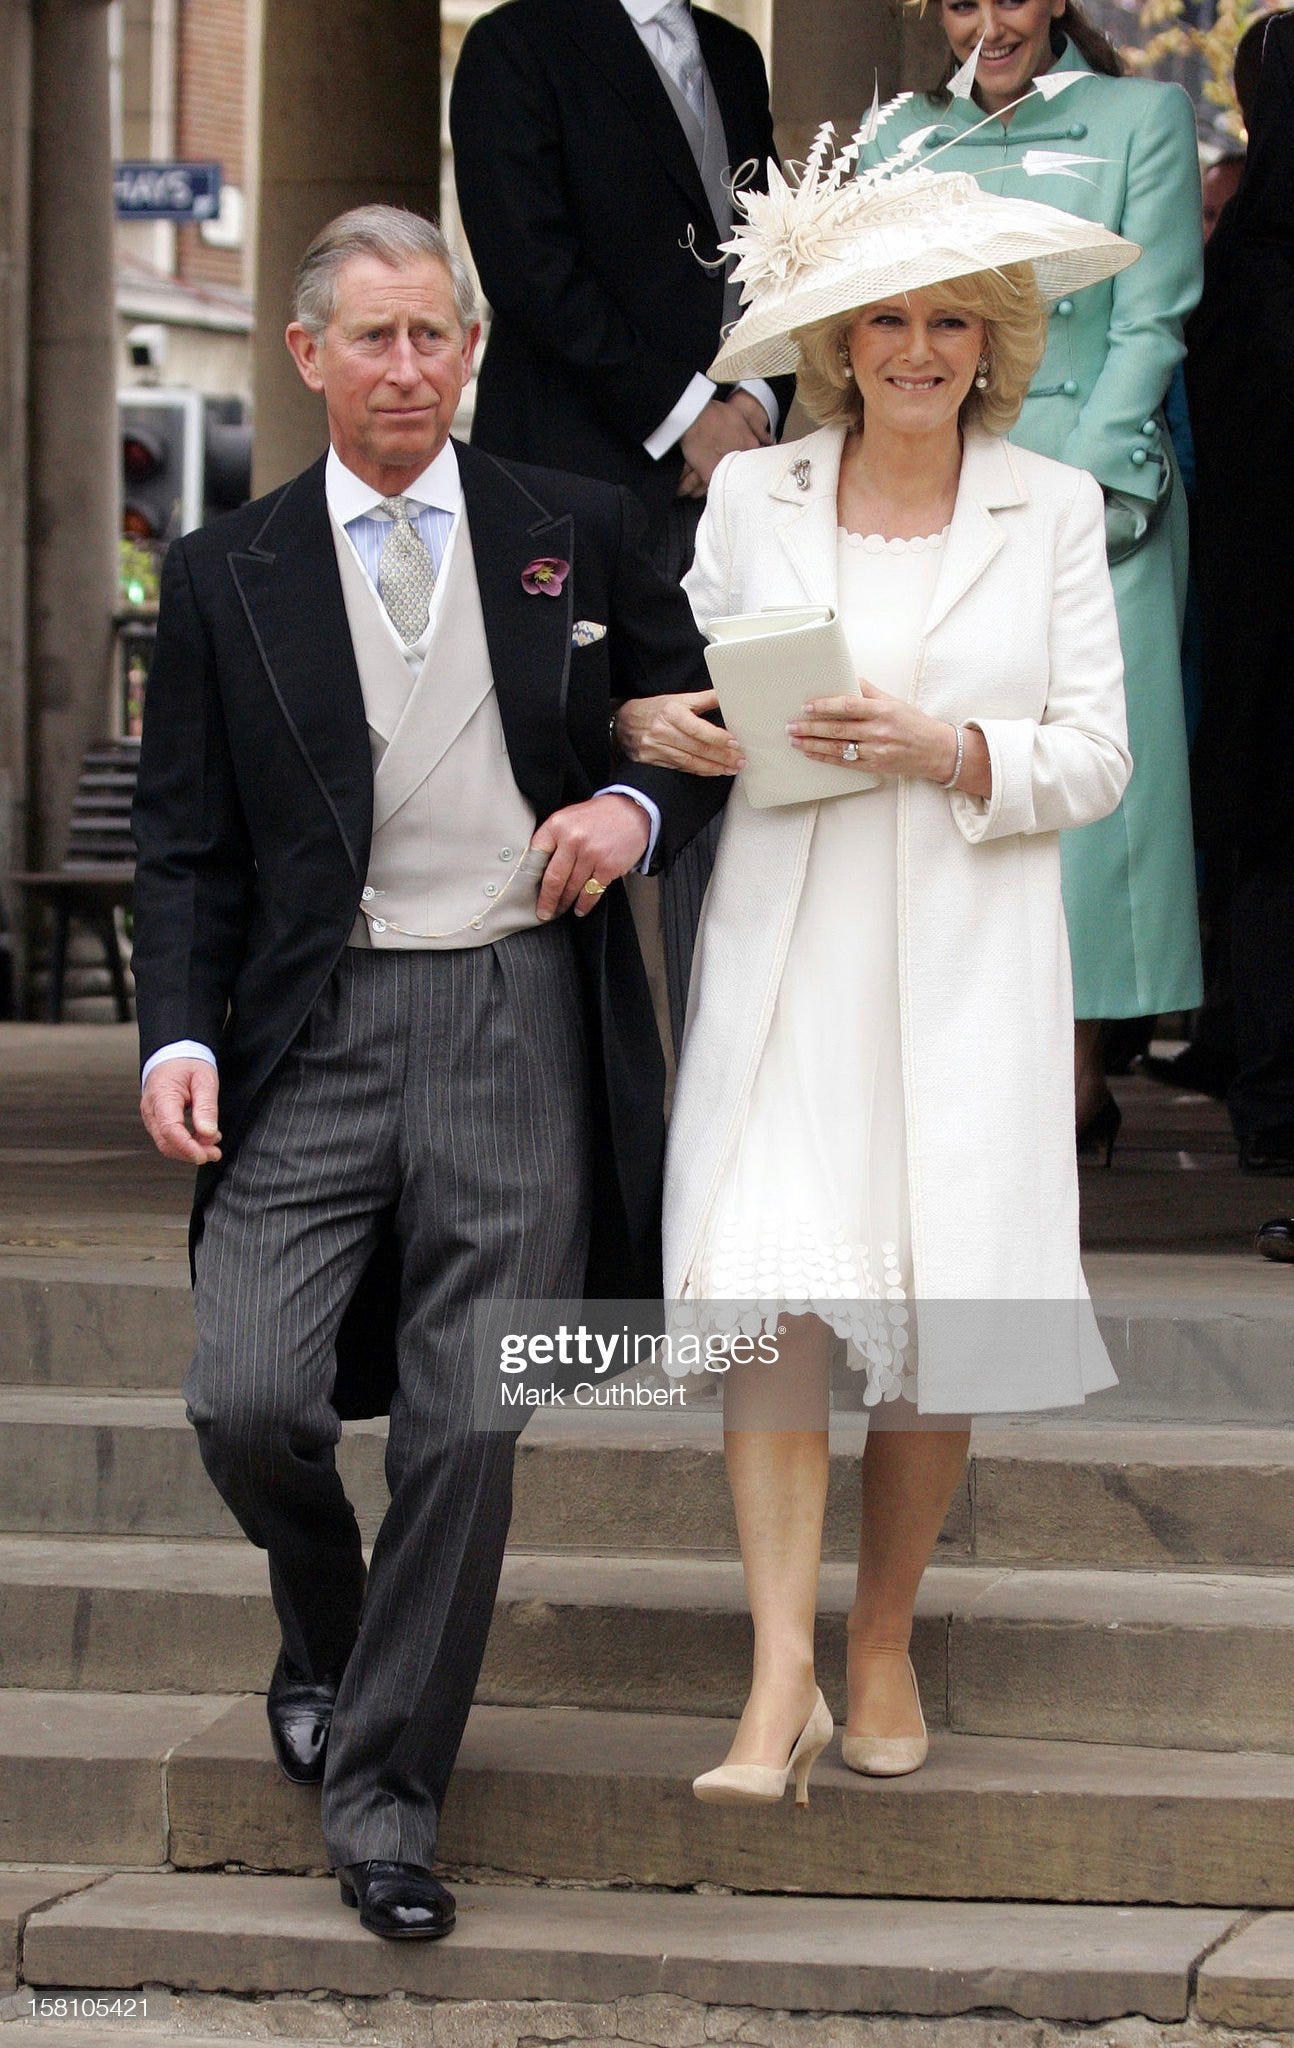 The Wedding Of The Prince Of Wales & Camilla Parker Bowles